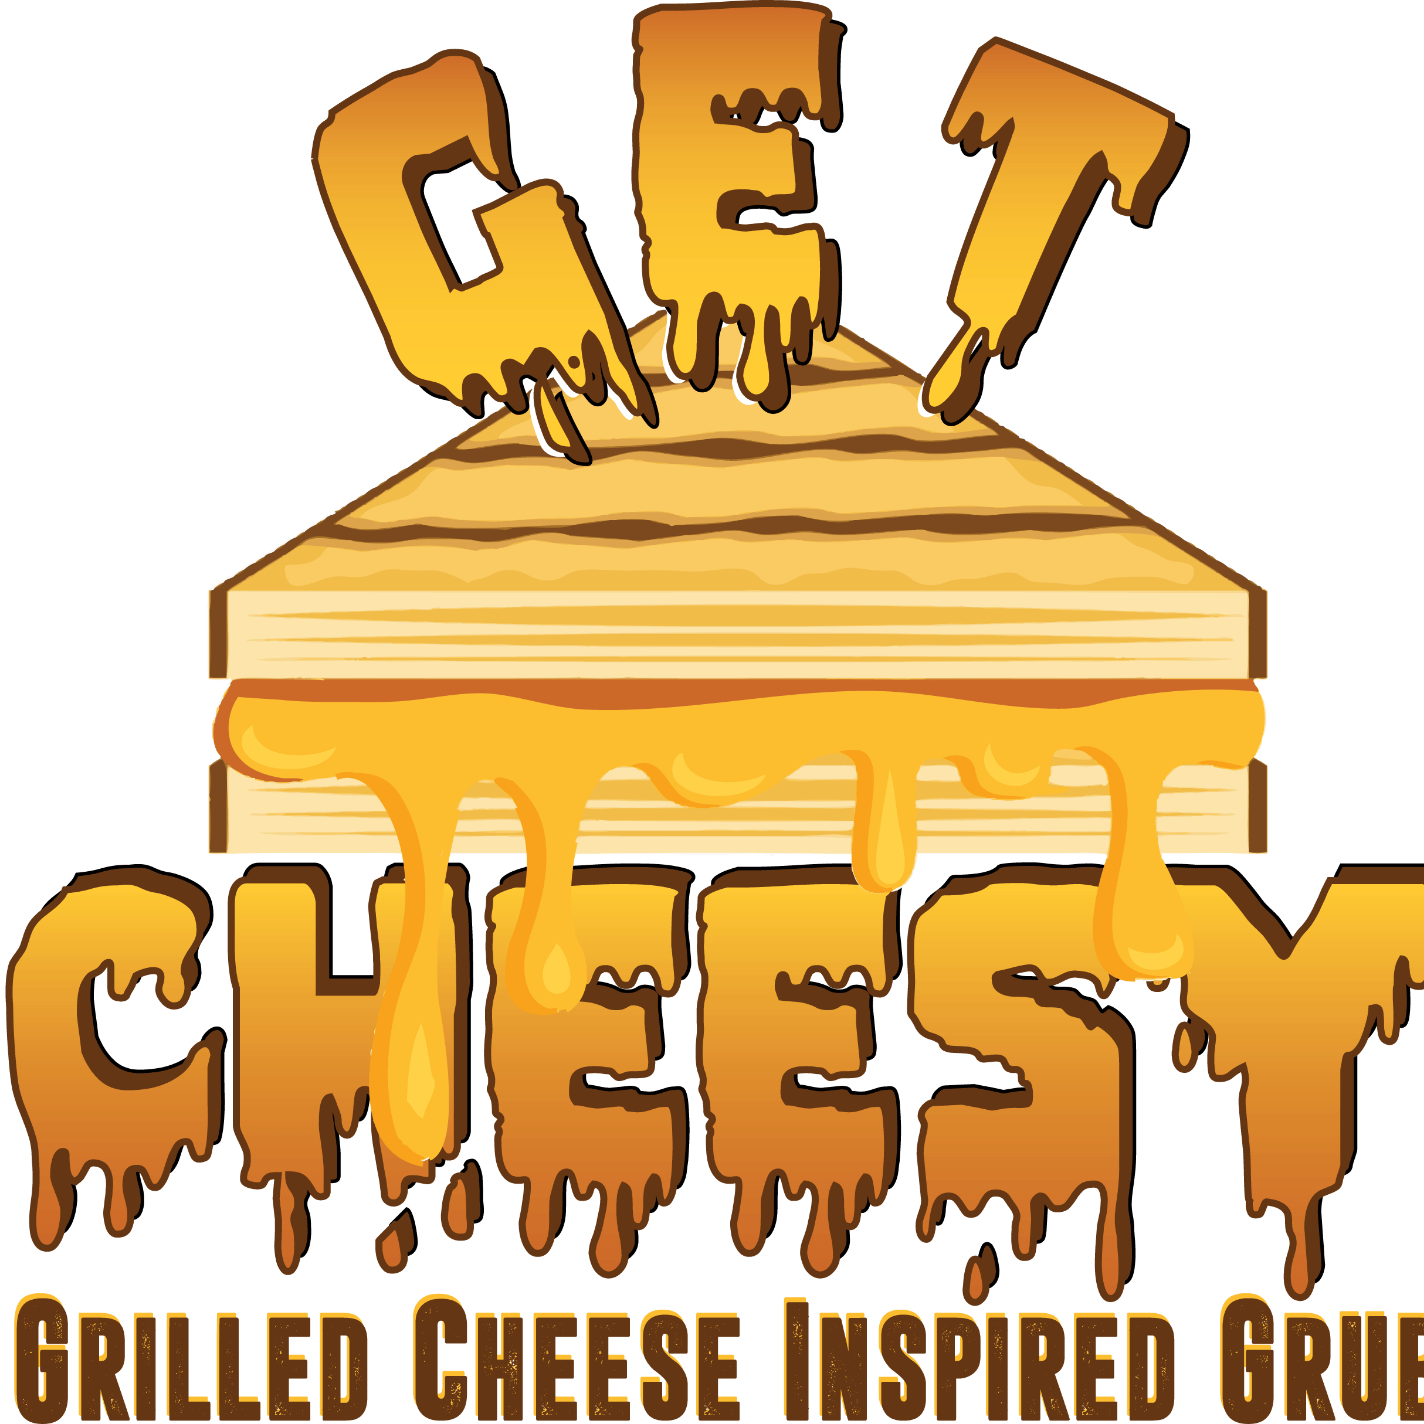 Get Cheesy Food Truck Williamsburg visitor Williamsburg Virginia gourmet grilled cheese cuban sandwiches and more